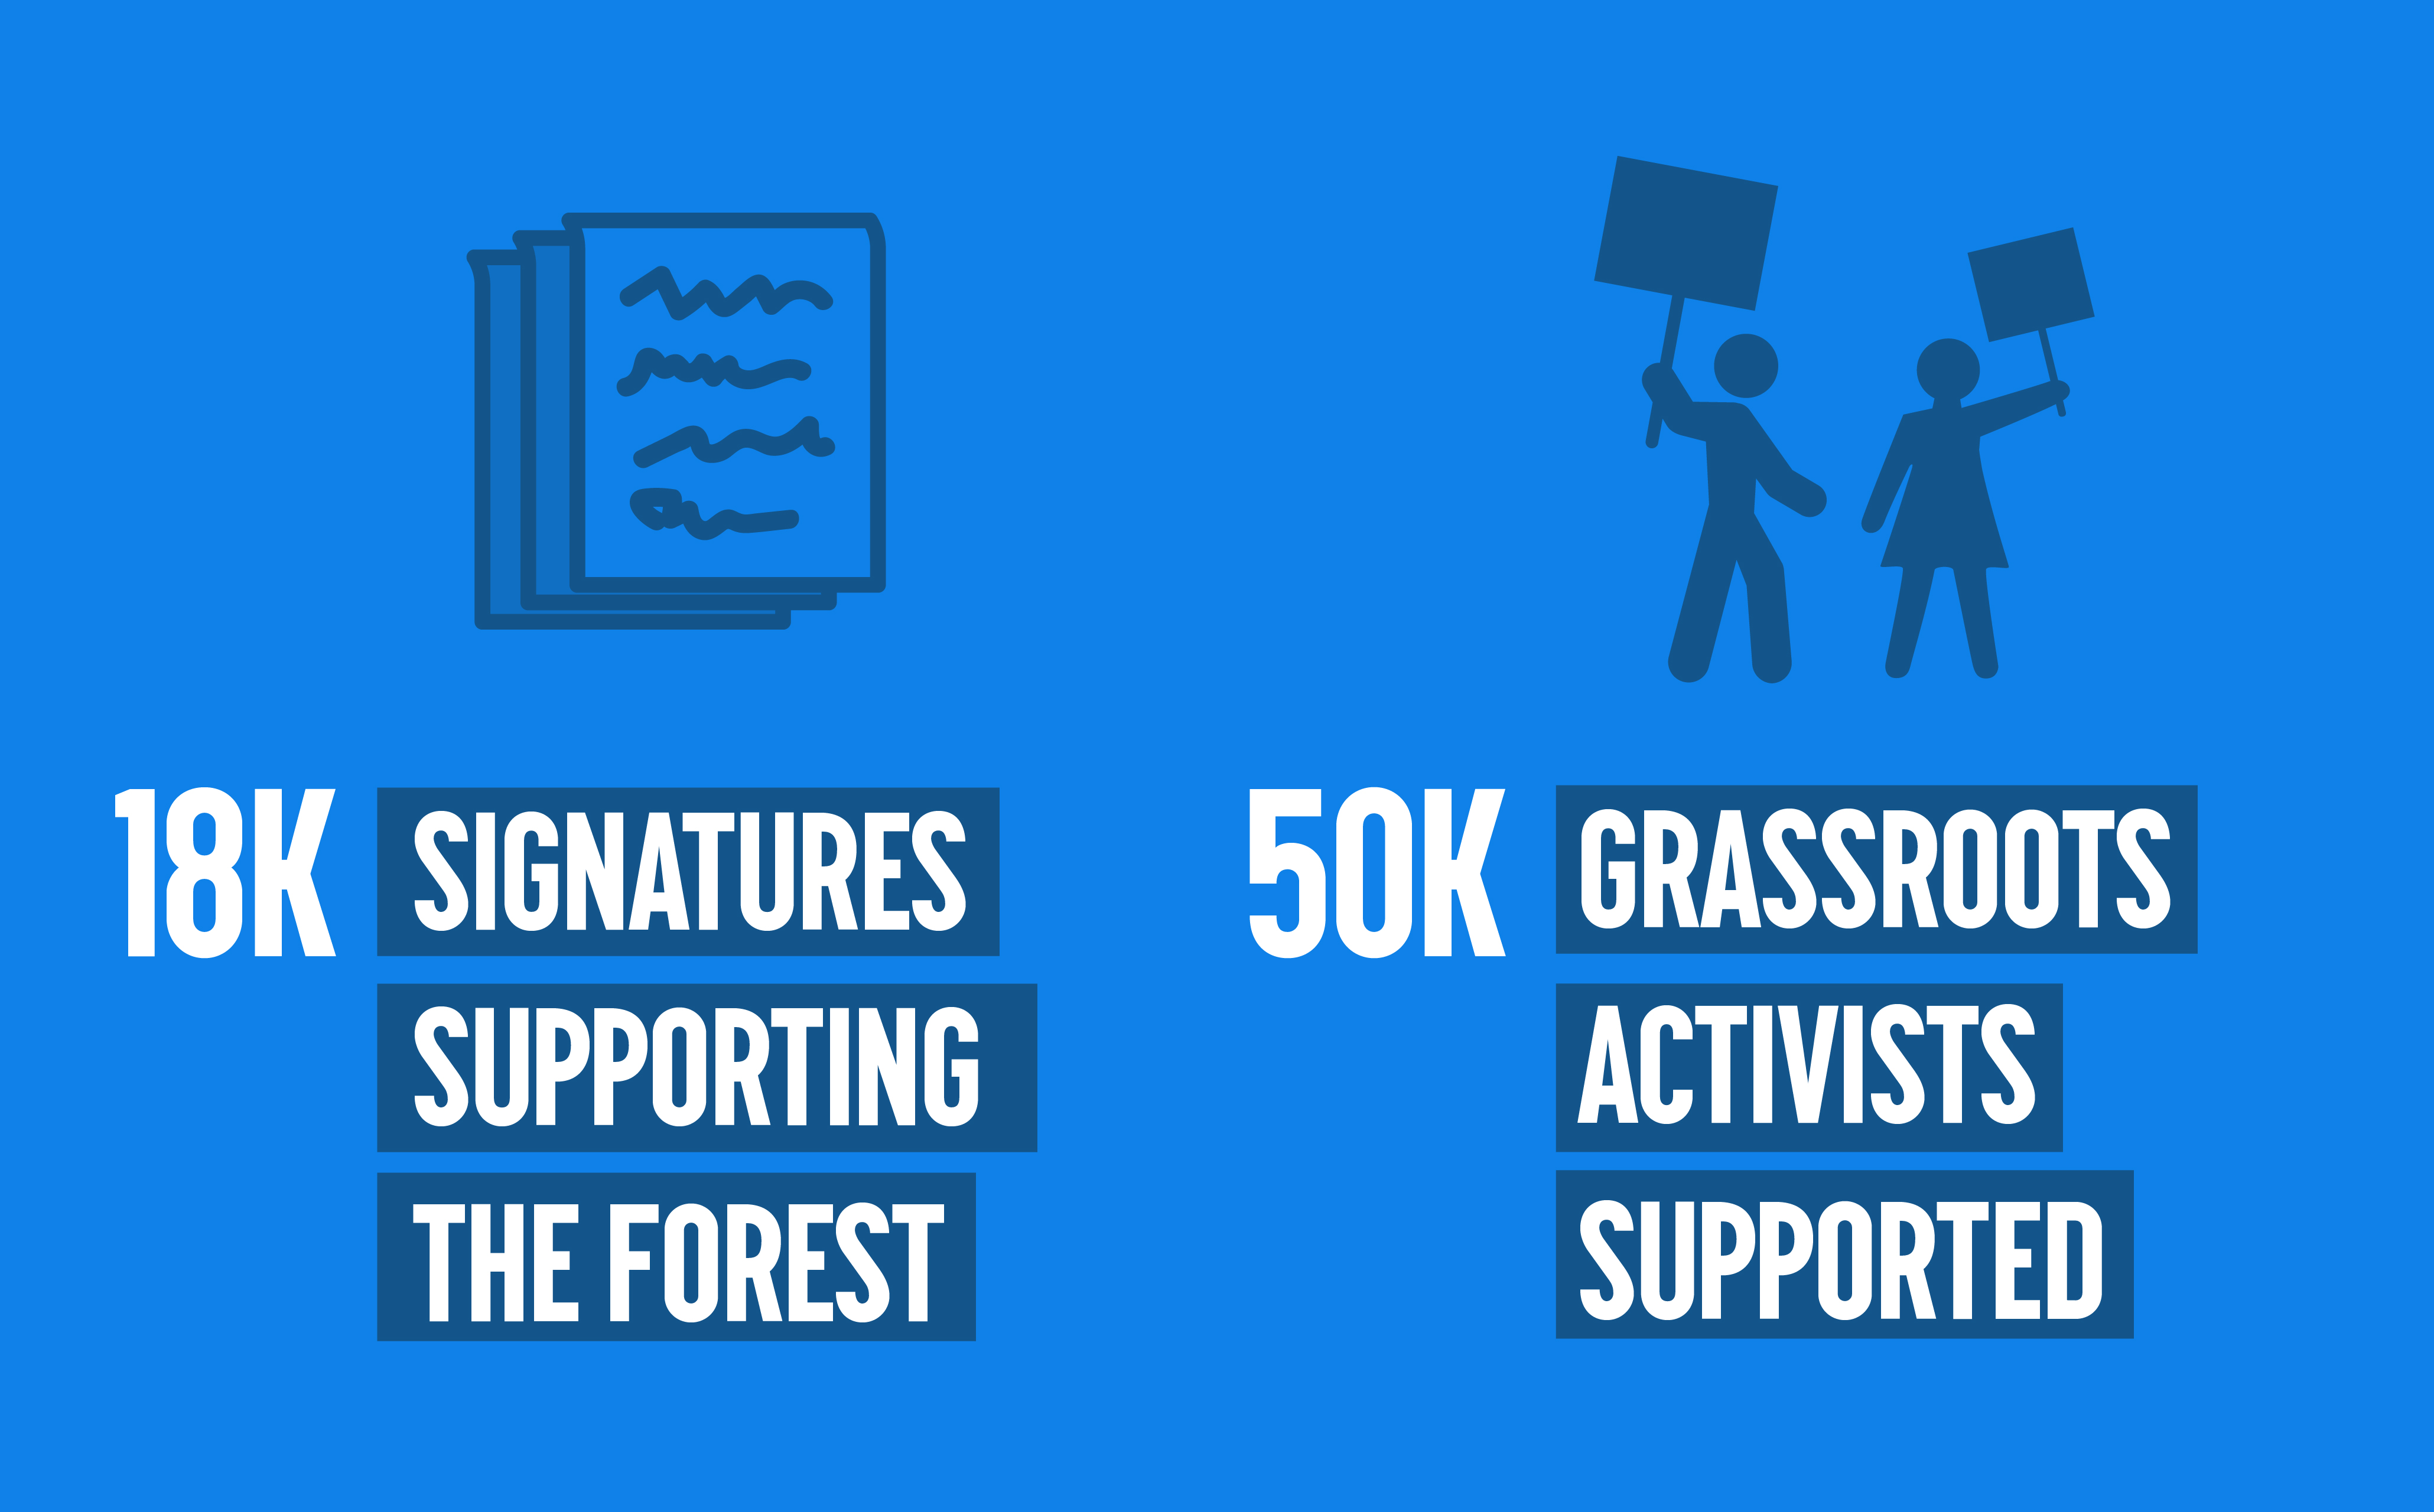 18K signatures supporting the forest, 50K grassroots activists supported